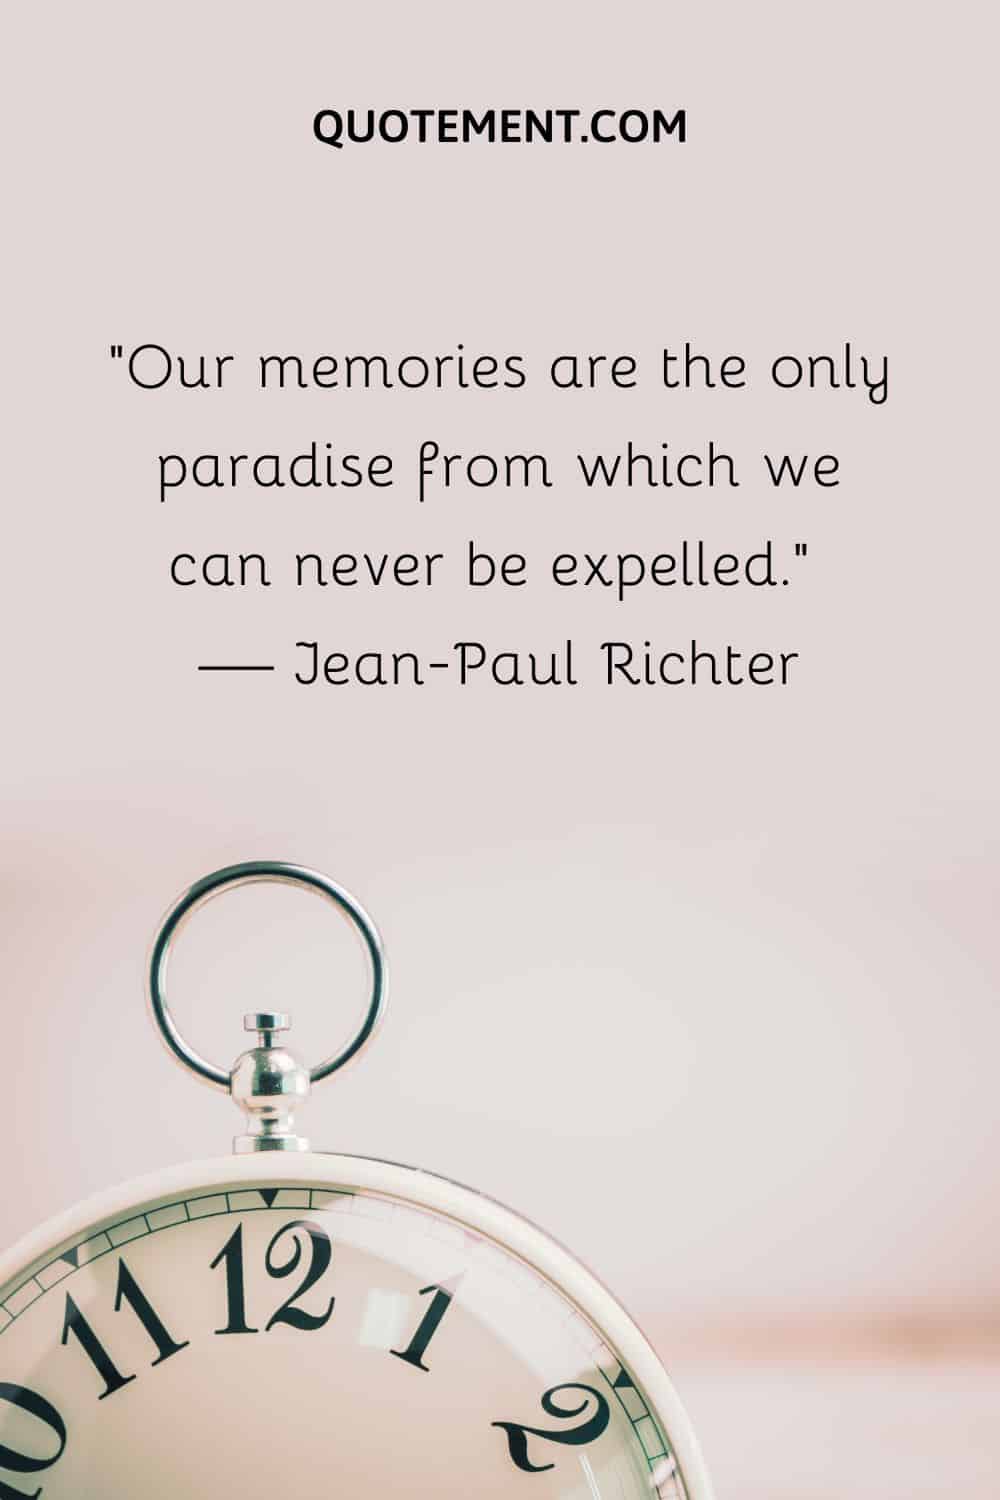 Our memories are the only paradise from which we can never be expelled.